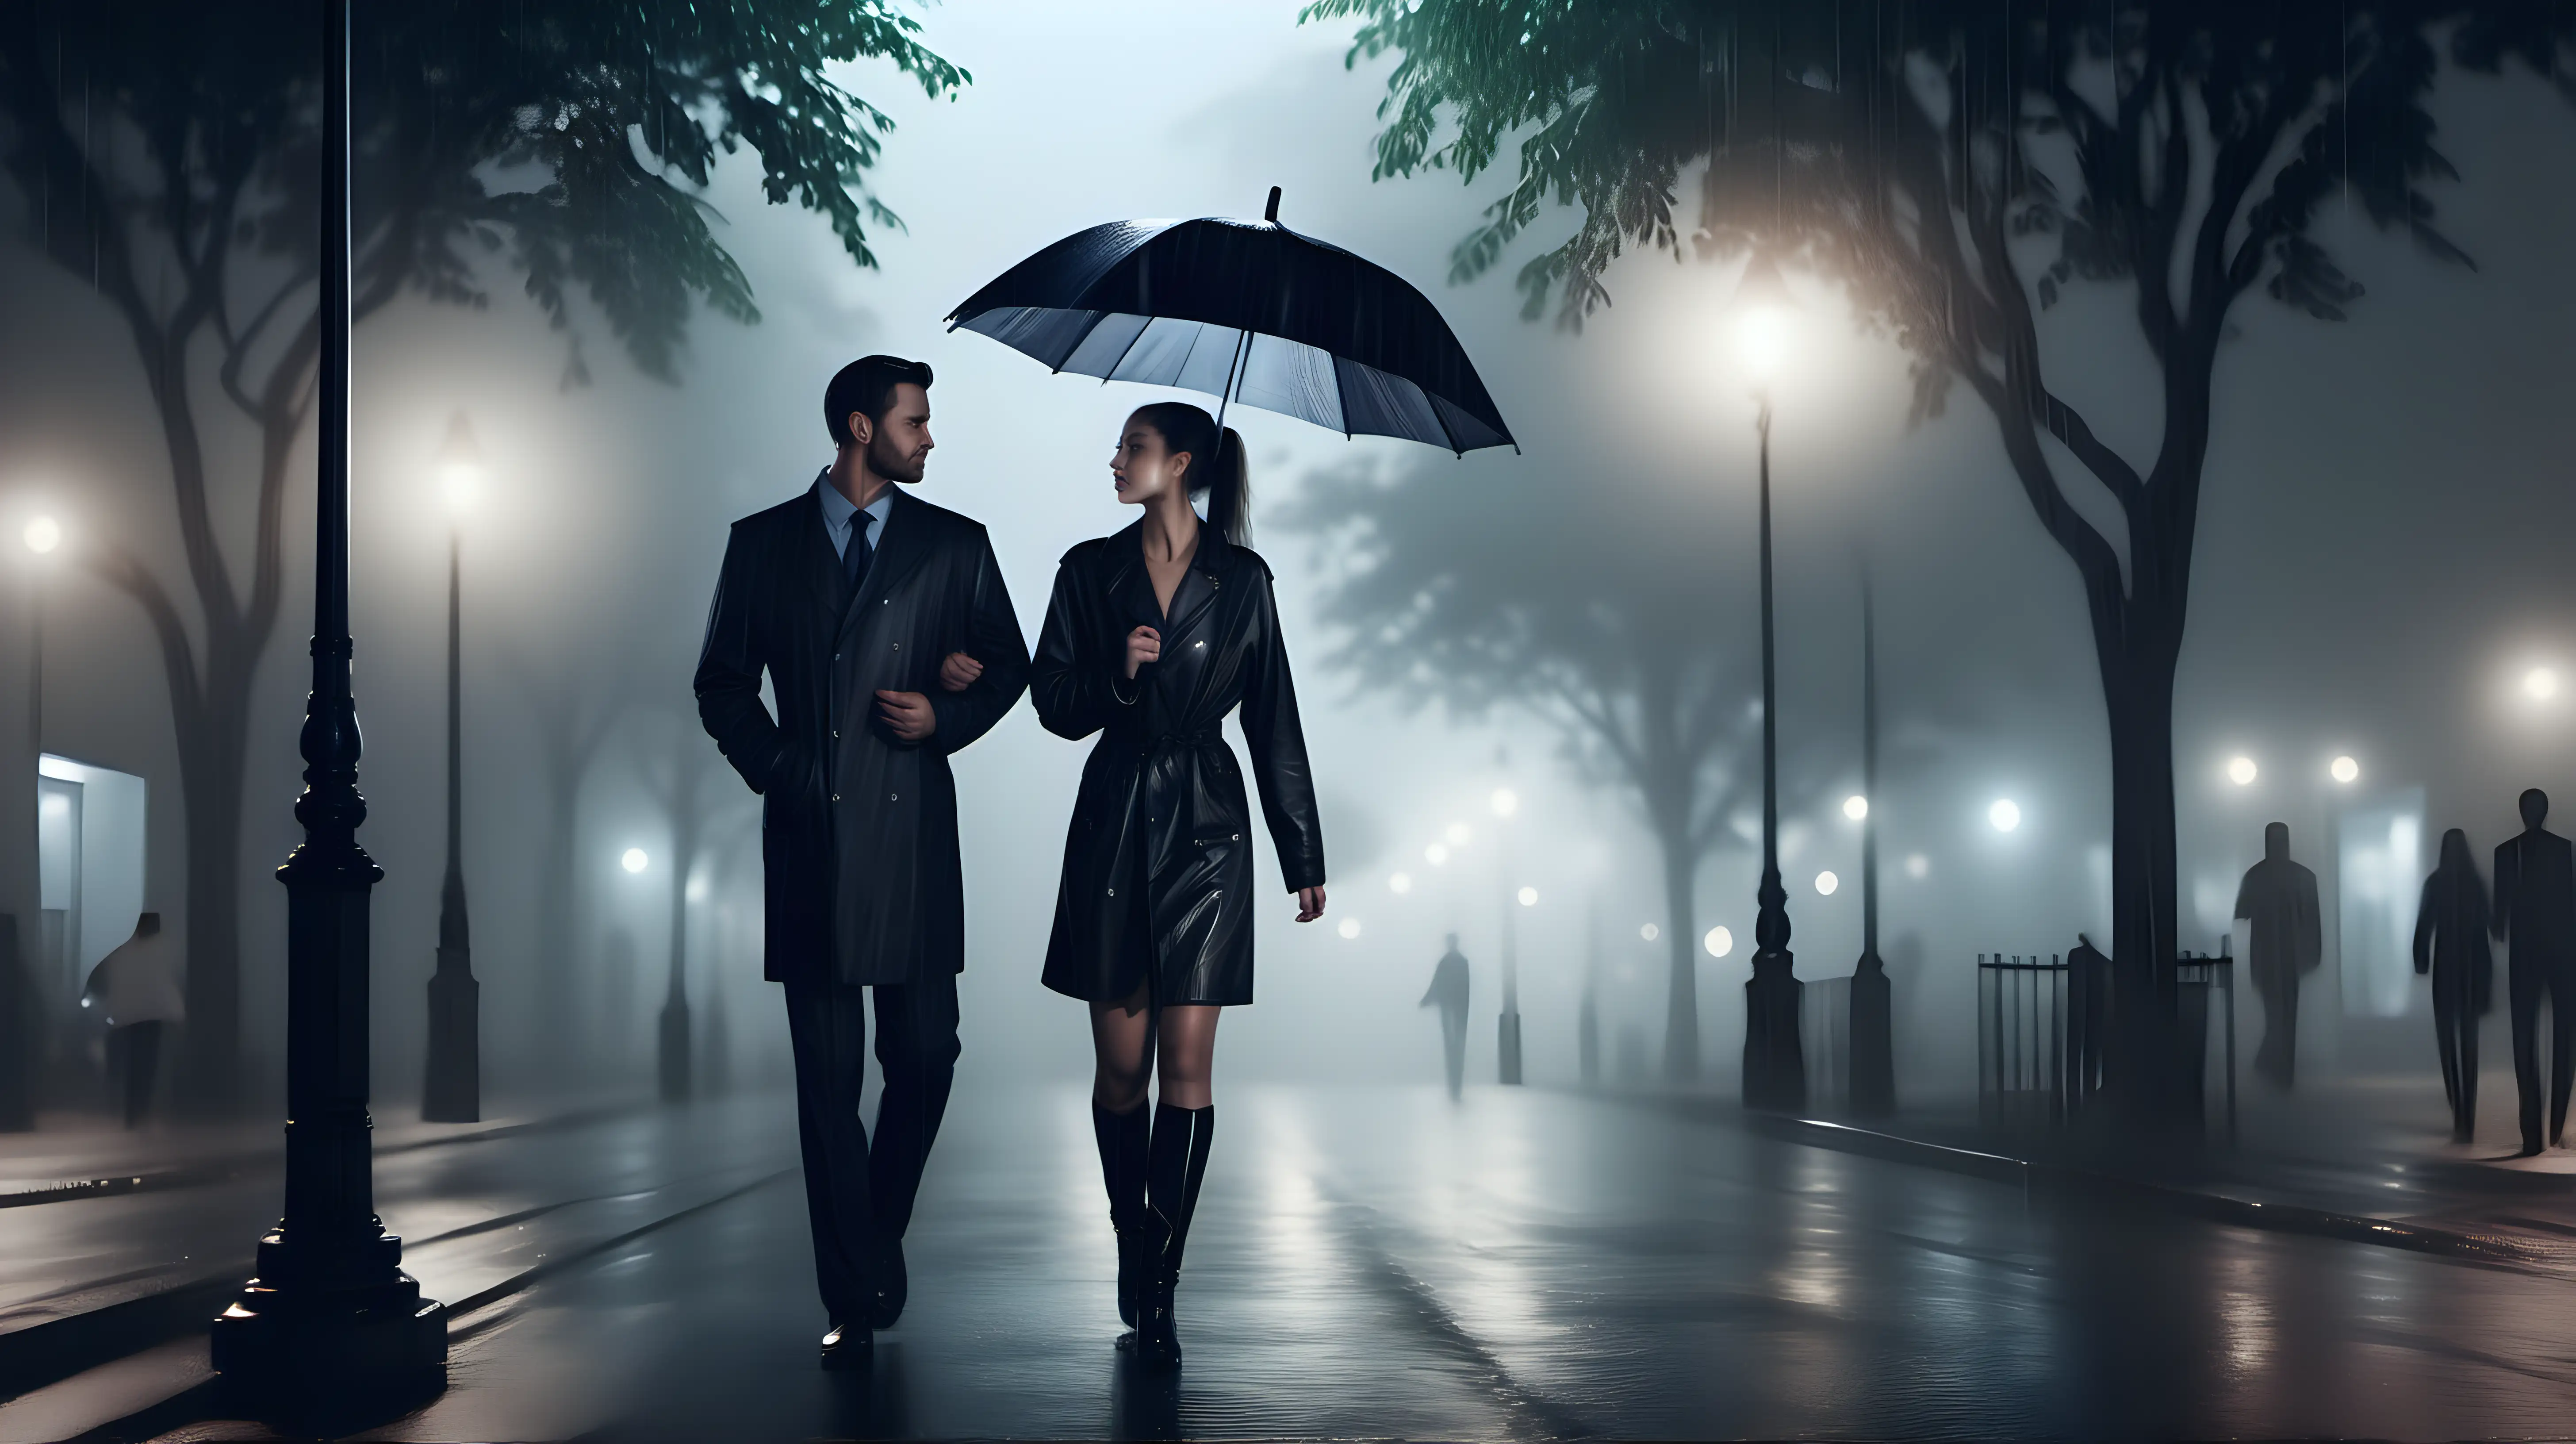 ultrarealistic couple man and women walking in front under umbrella in the rain large street night lamps fog